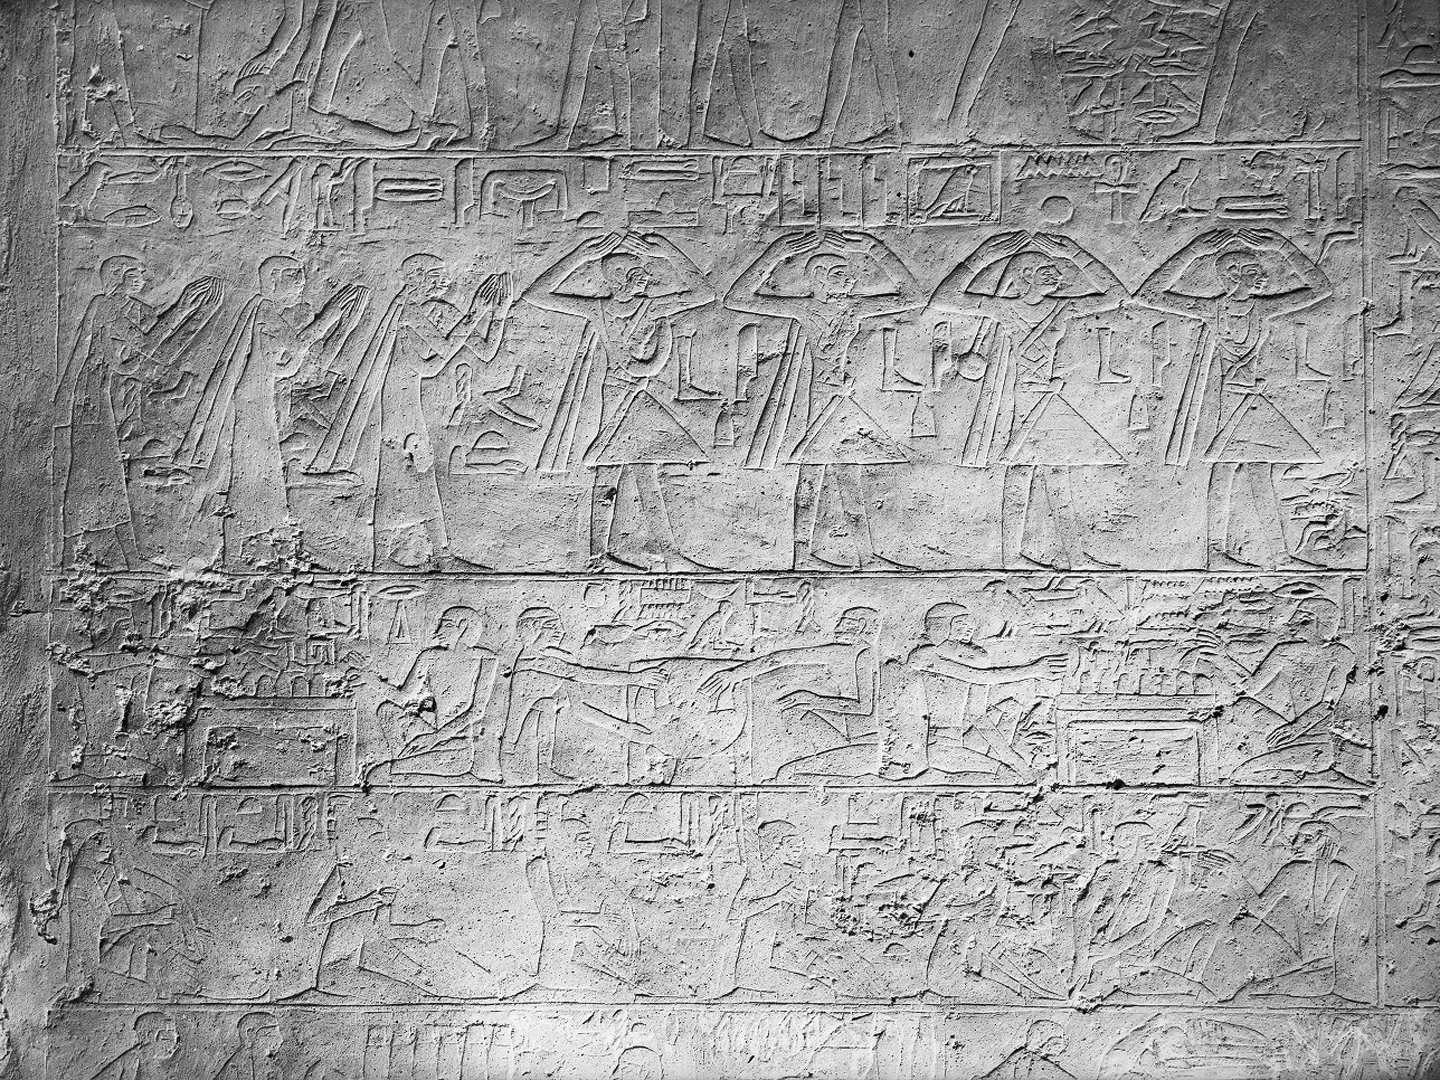 Mastaba Complex of Idu - Section 3.4 - South Wall